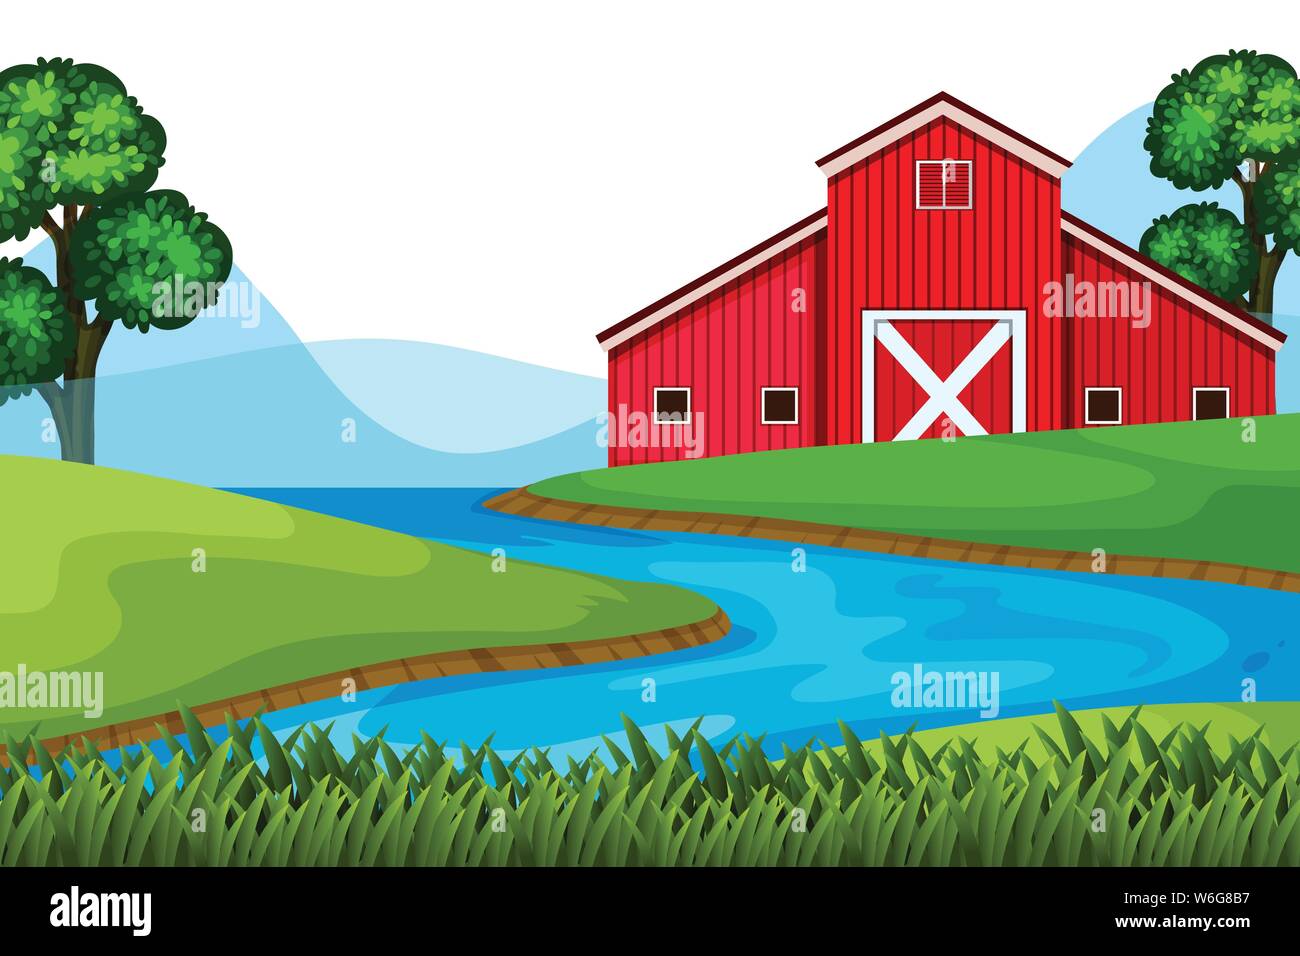 Scenery background of red barn on the farmland illustration Stock Vector